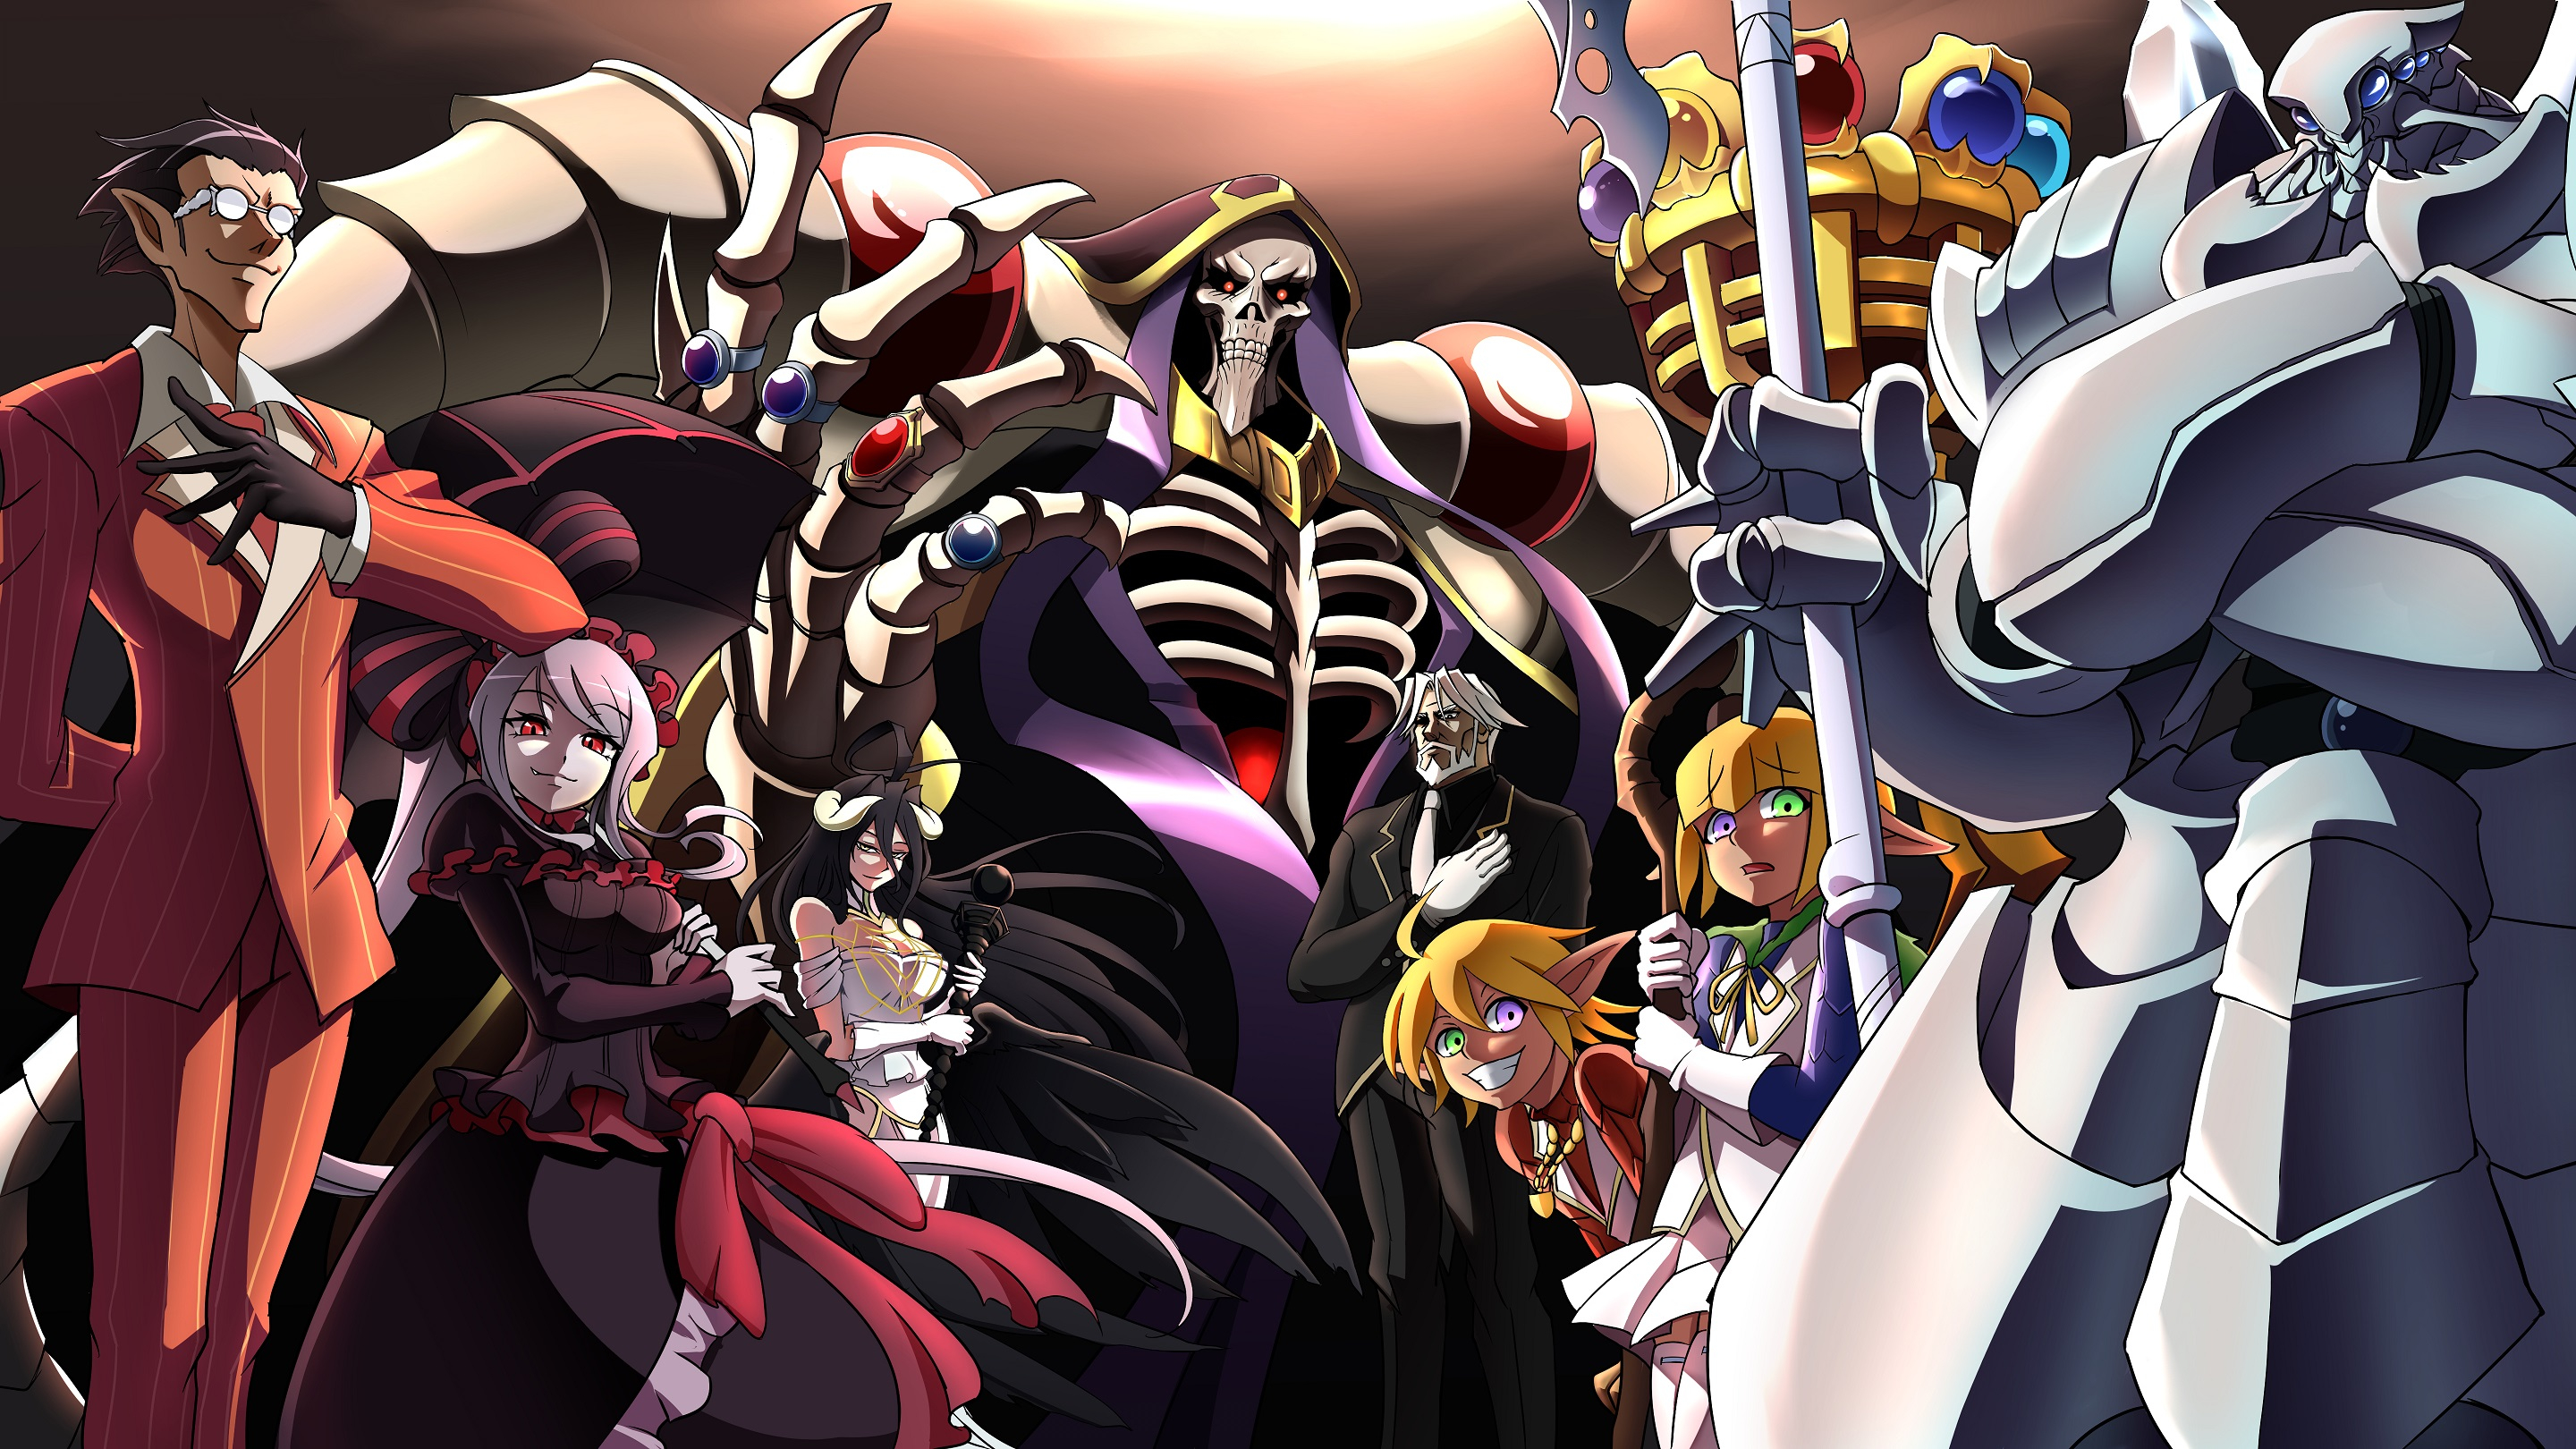 2880x1620 340+ Anime Overlord HD Wallpapers and Backgrounds